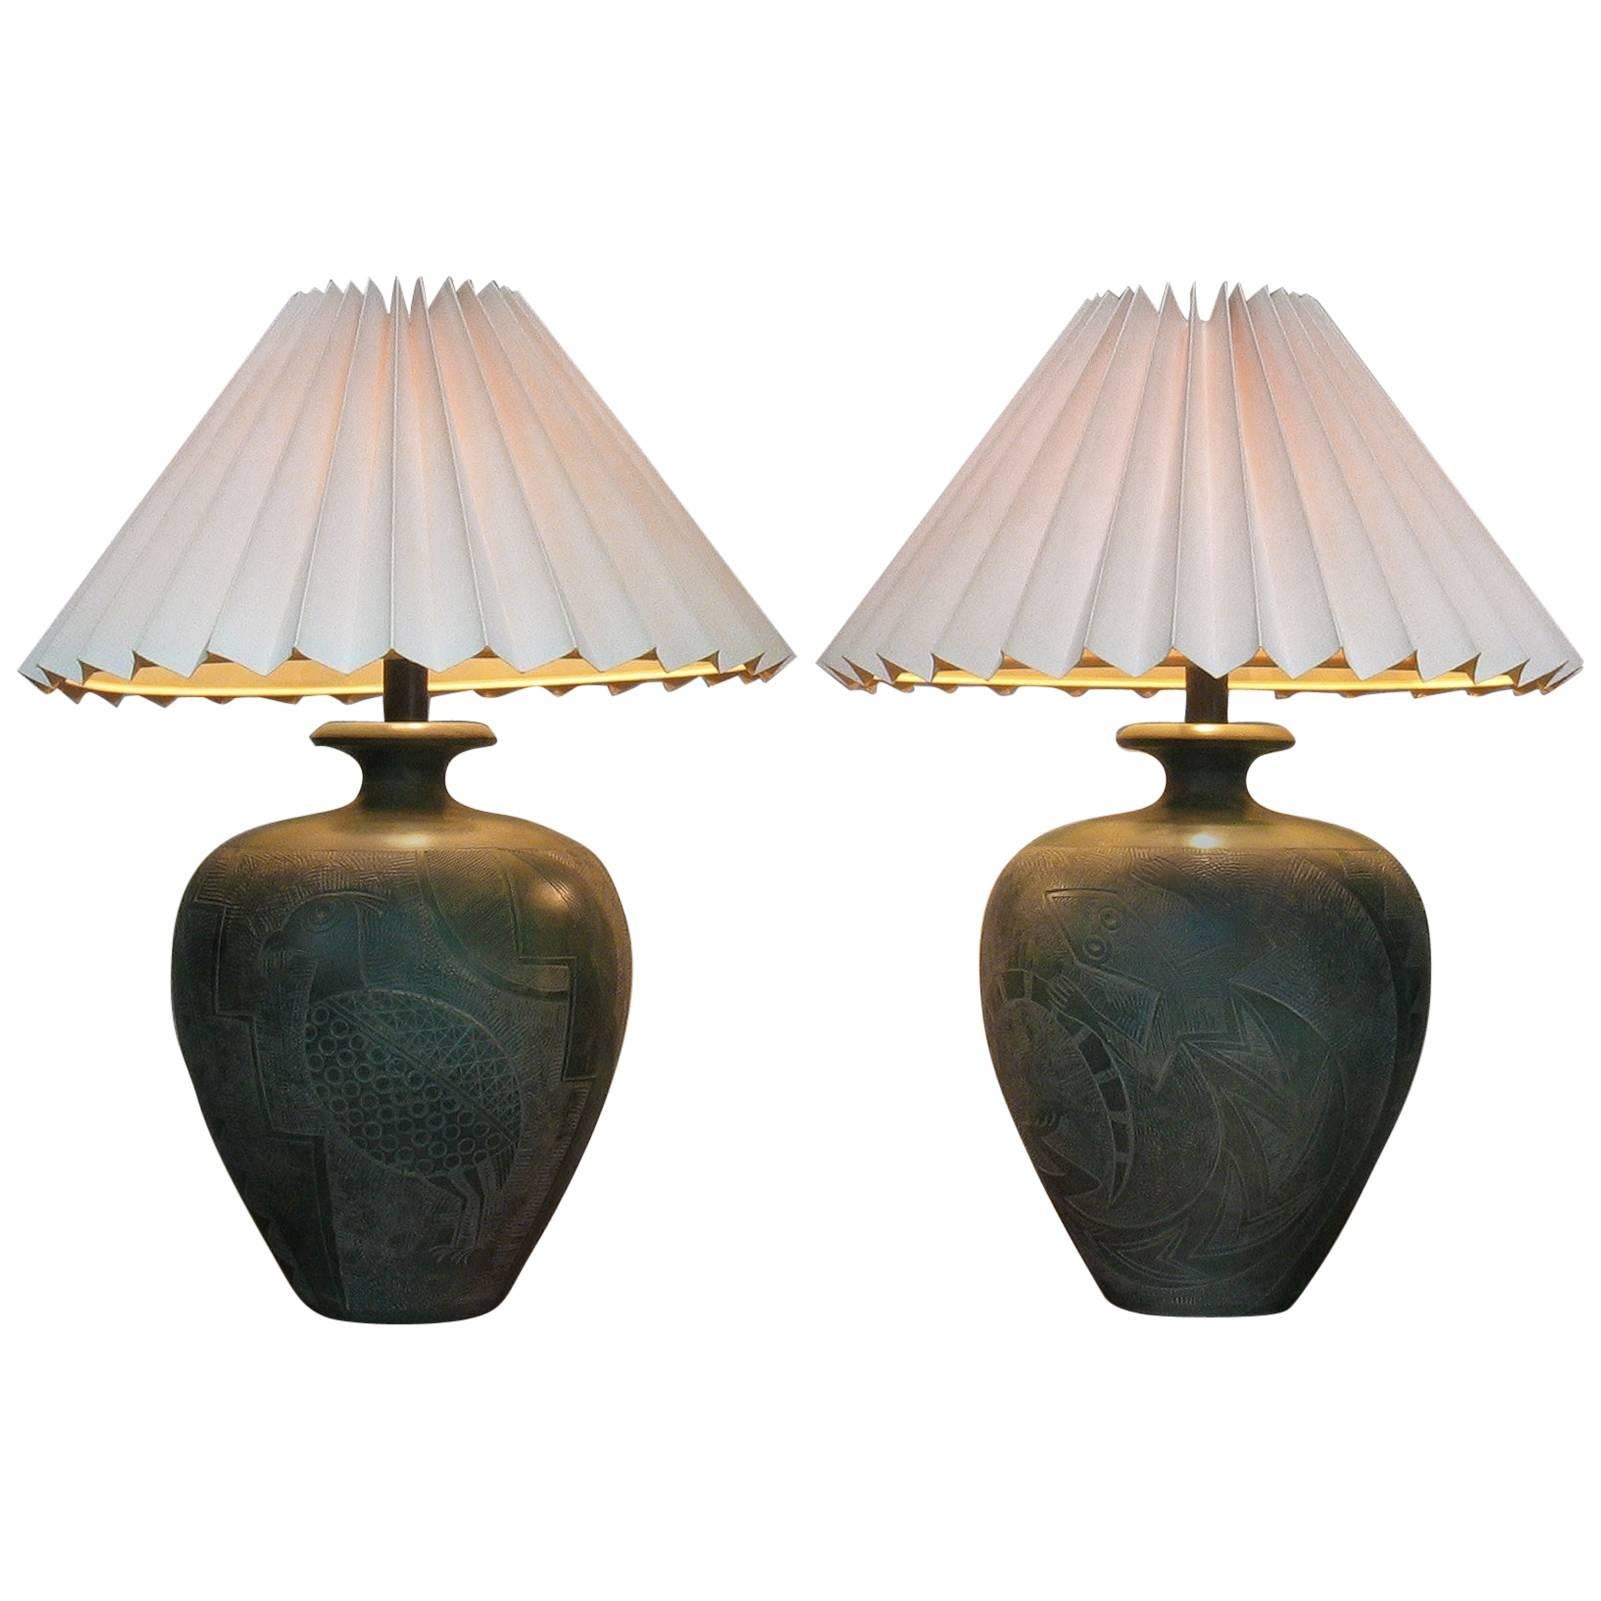 Large Pair of Southwestern Table Lamps by Casual Lamps of California